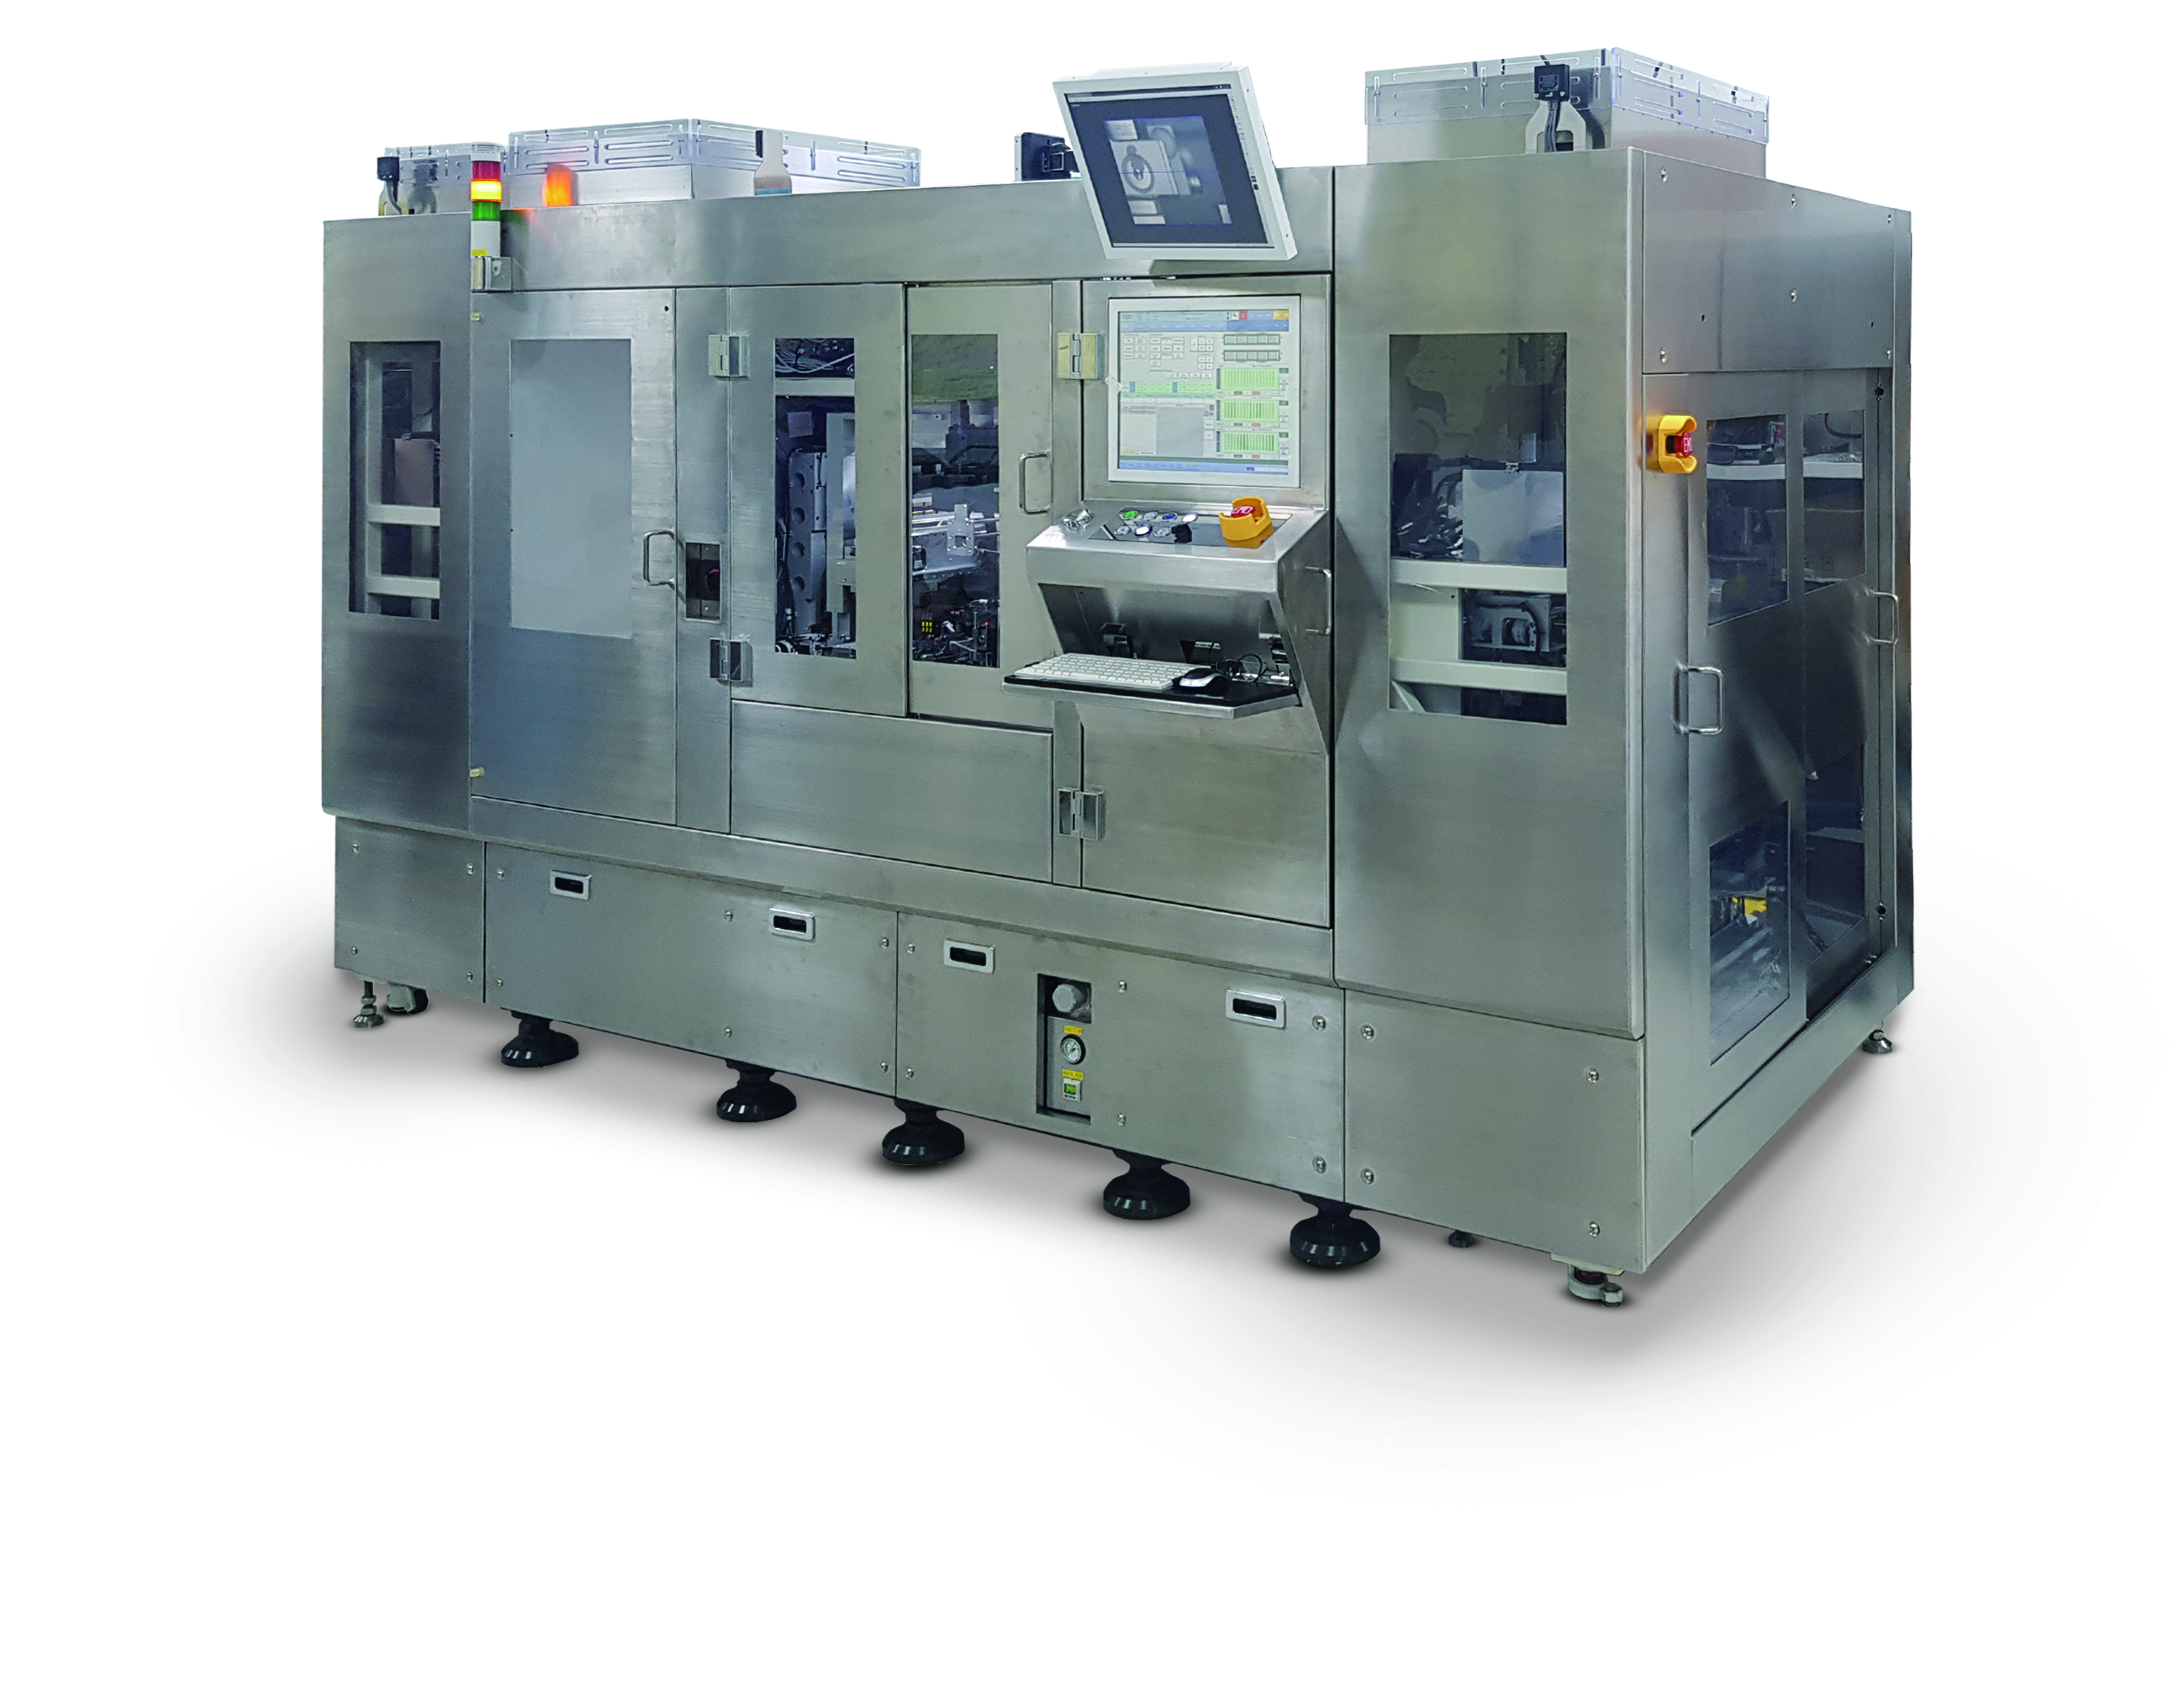 Hanwha Precision Machinery received a presidential citation for developing Multi Head Die Bonder